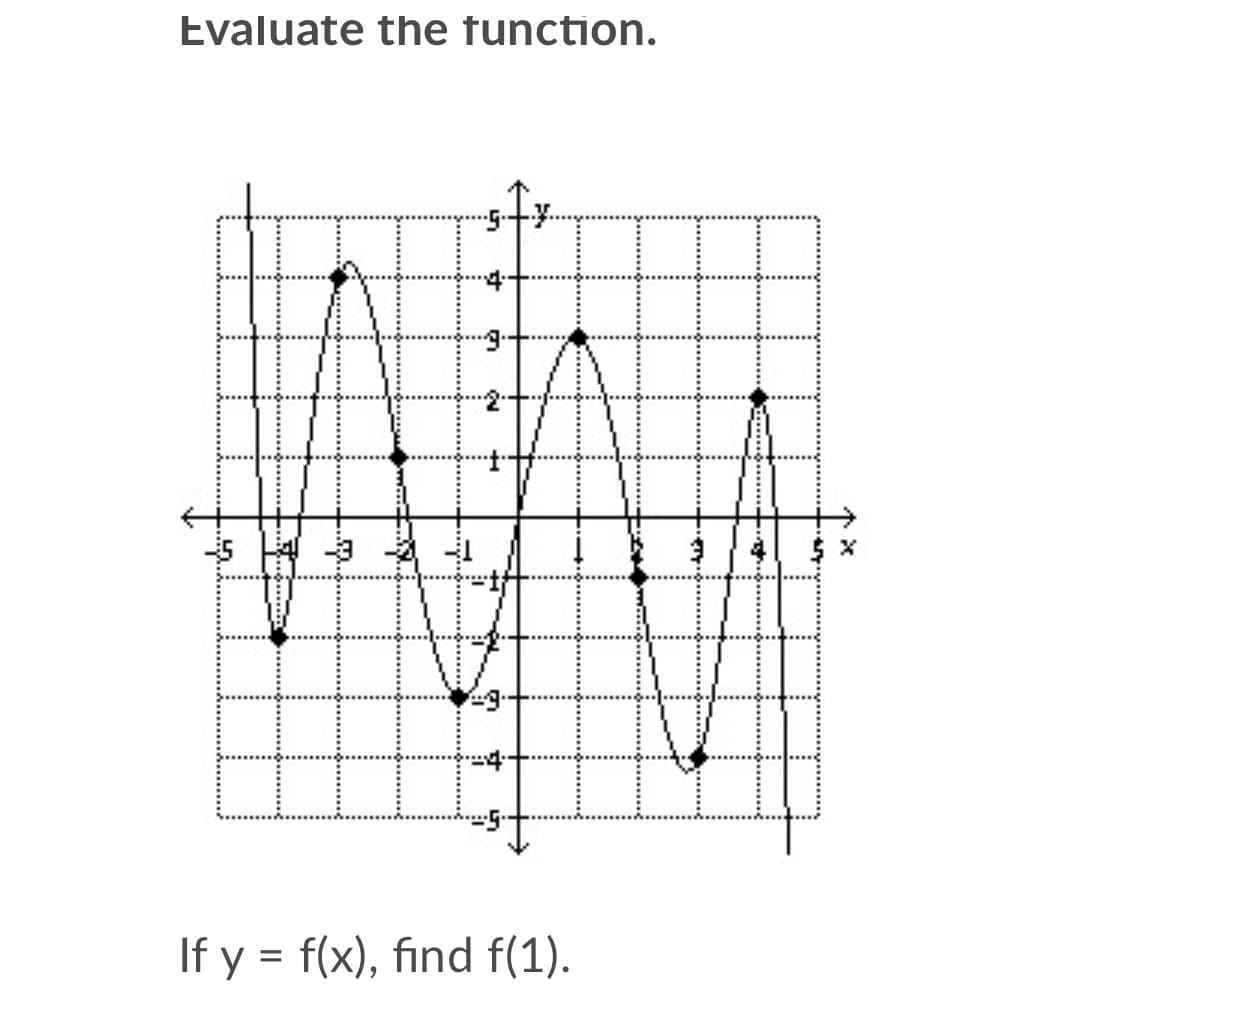 Evaluate the function.
If y = f(x), find f(1).
